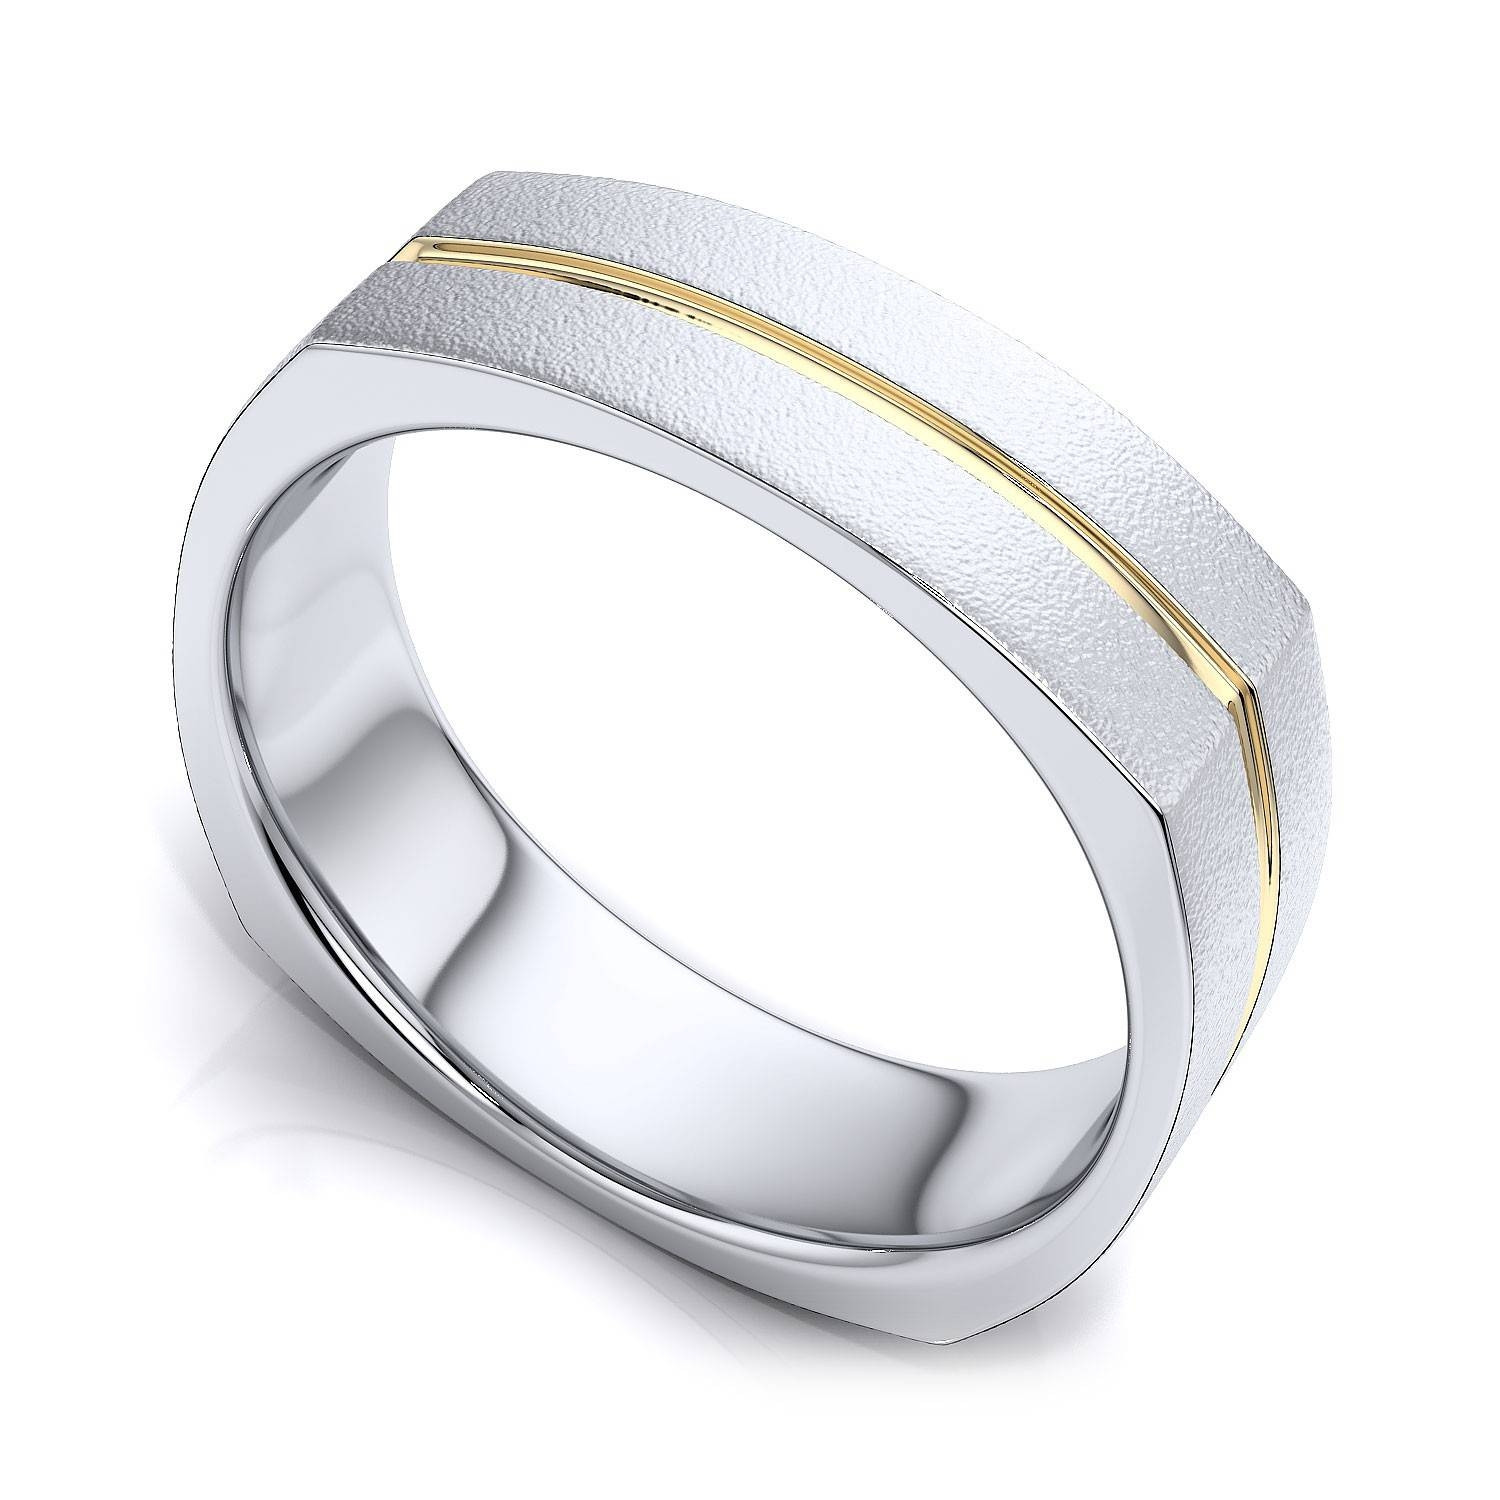 Trio Wedding Ring Sets Jared
 15 Best Ideas of Two Tone Men Wedding Bands